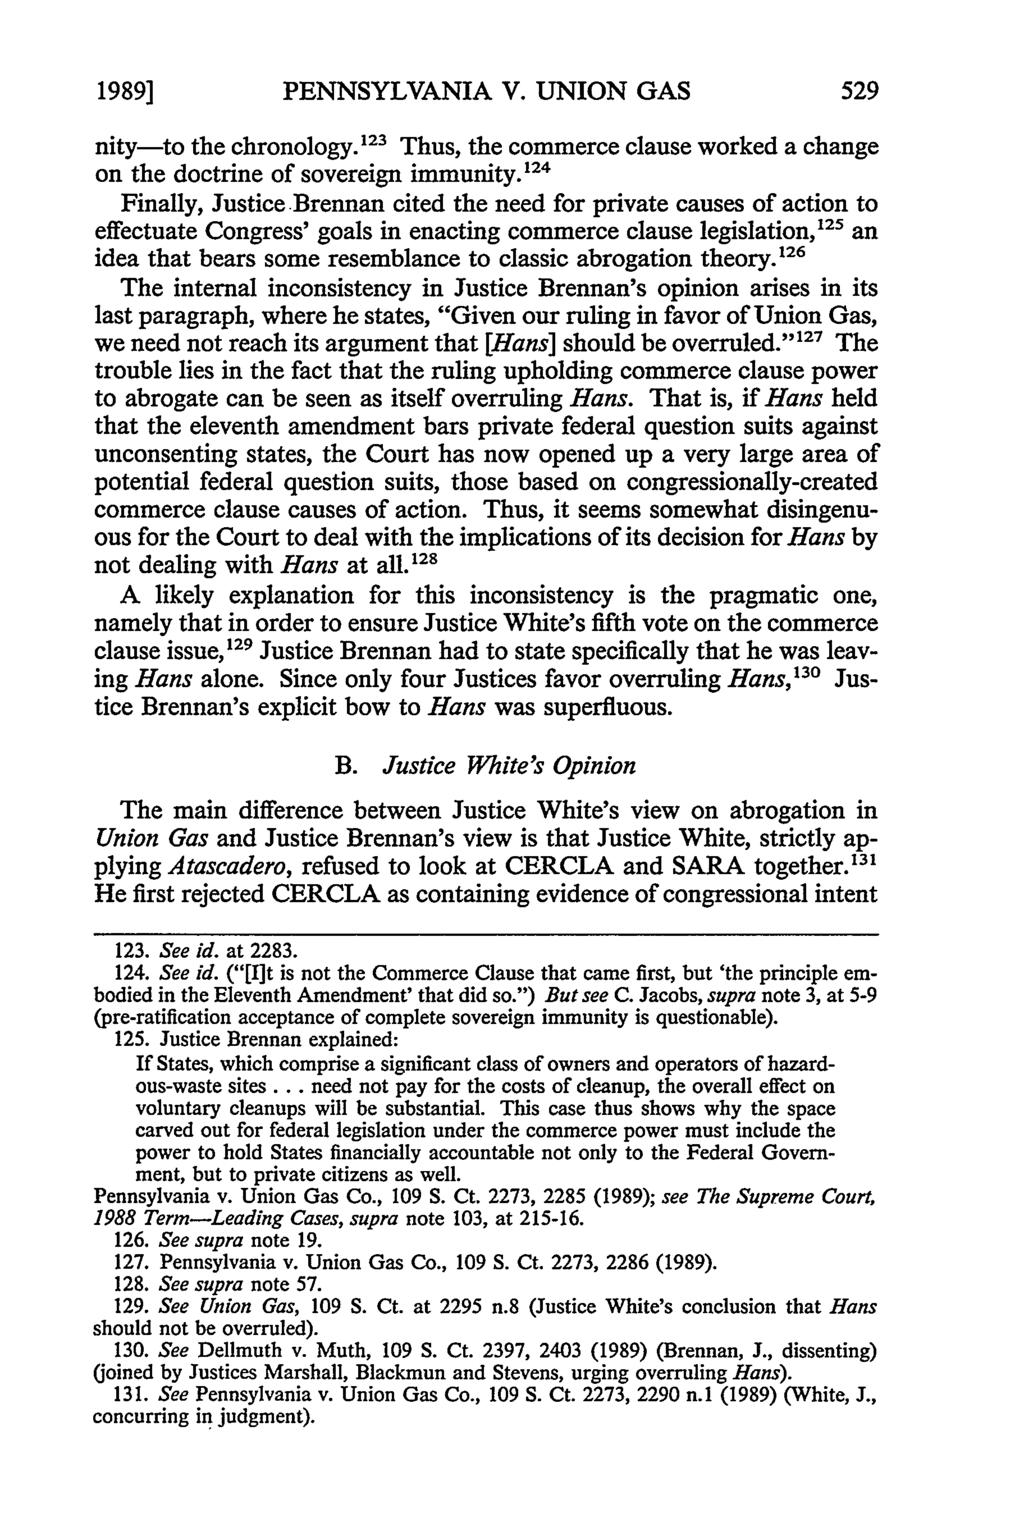 1989] PENNSYLVANIA V. UNION GAS nity-to the chronology. 123 Thus, the commerce clause worked a change on the doctrine of sovereign immunity.